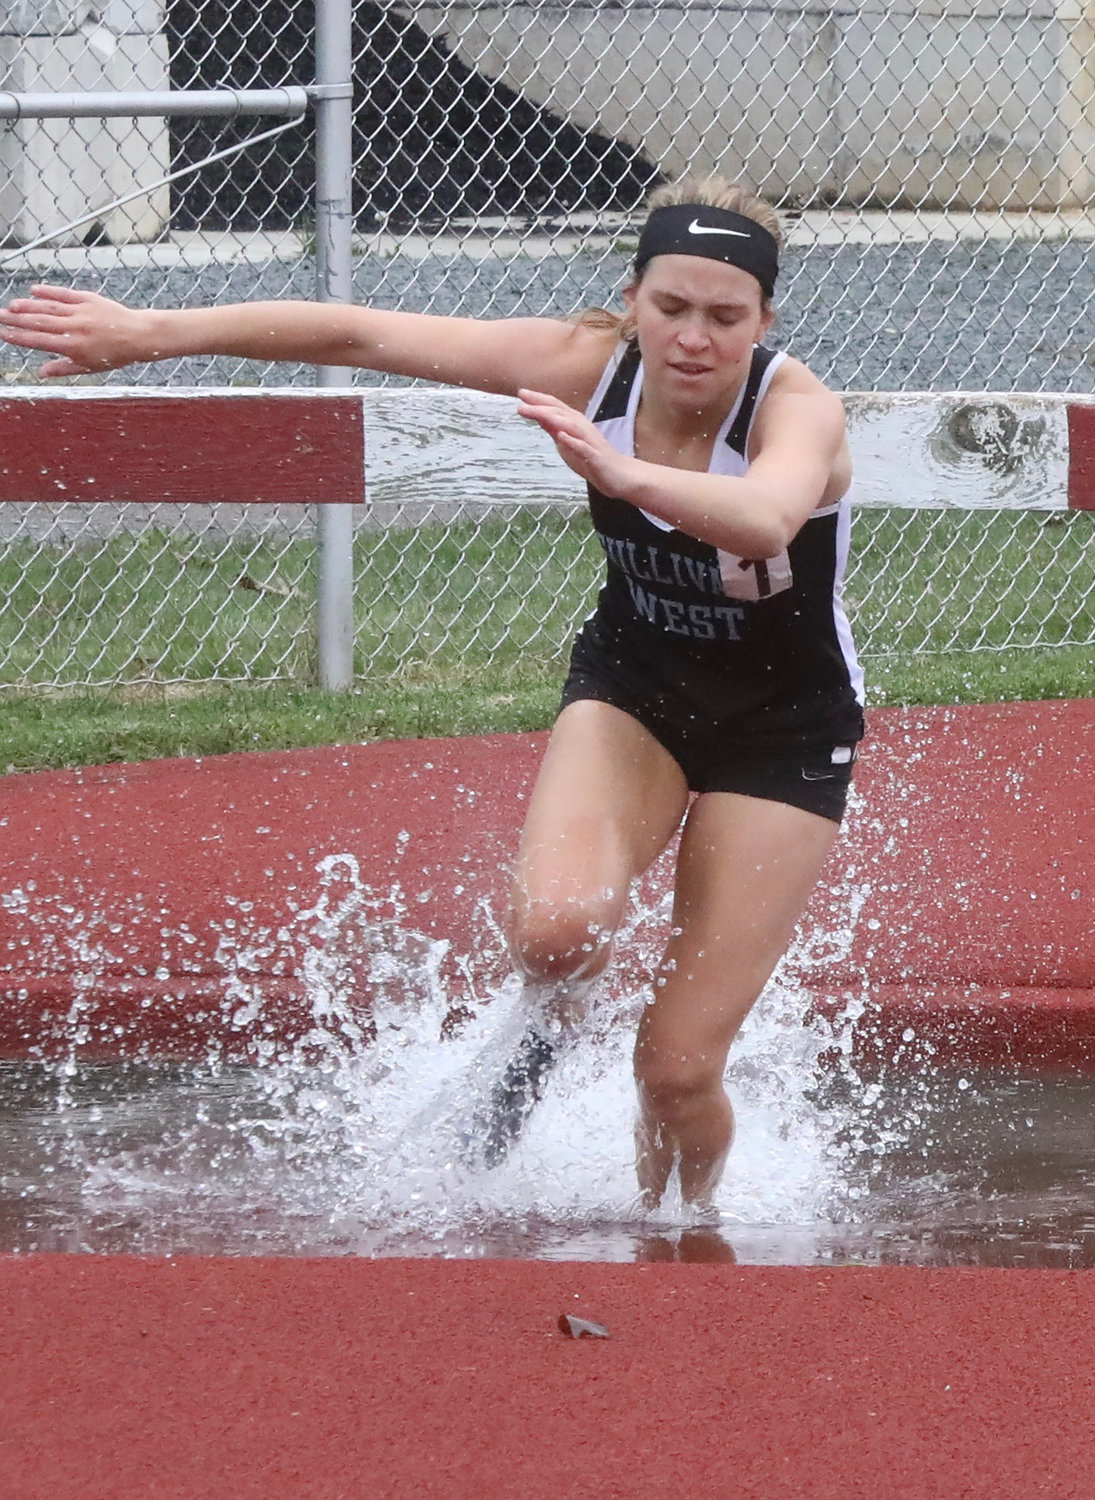 Sullivan West senior Grace Boyd wins the 2000 steeplechase. At the Cornwall Steeplefest she set a new school record of 7:50.86 in the event. She also won the 3000 in this meet. Boyd signed a letter of intent to run track for Division I University of Buffalo.